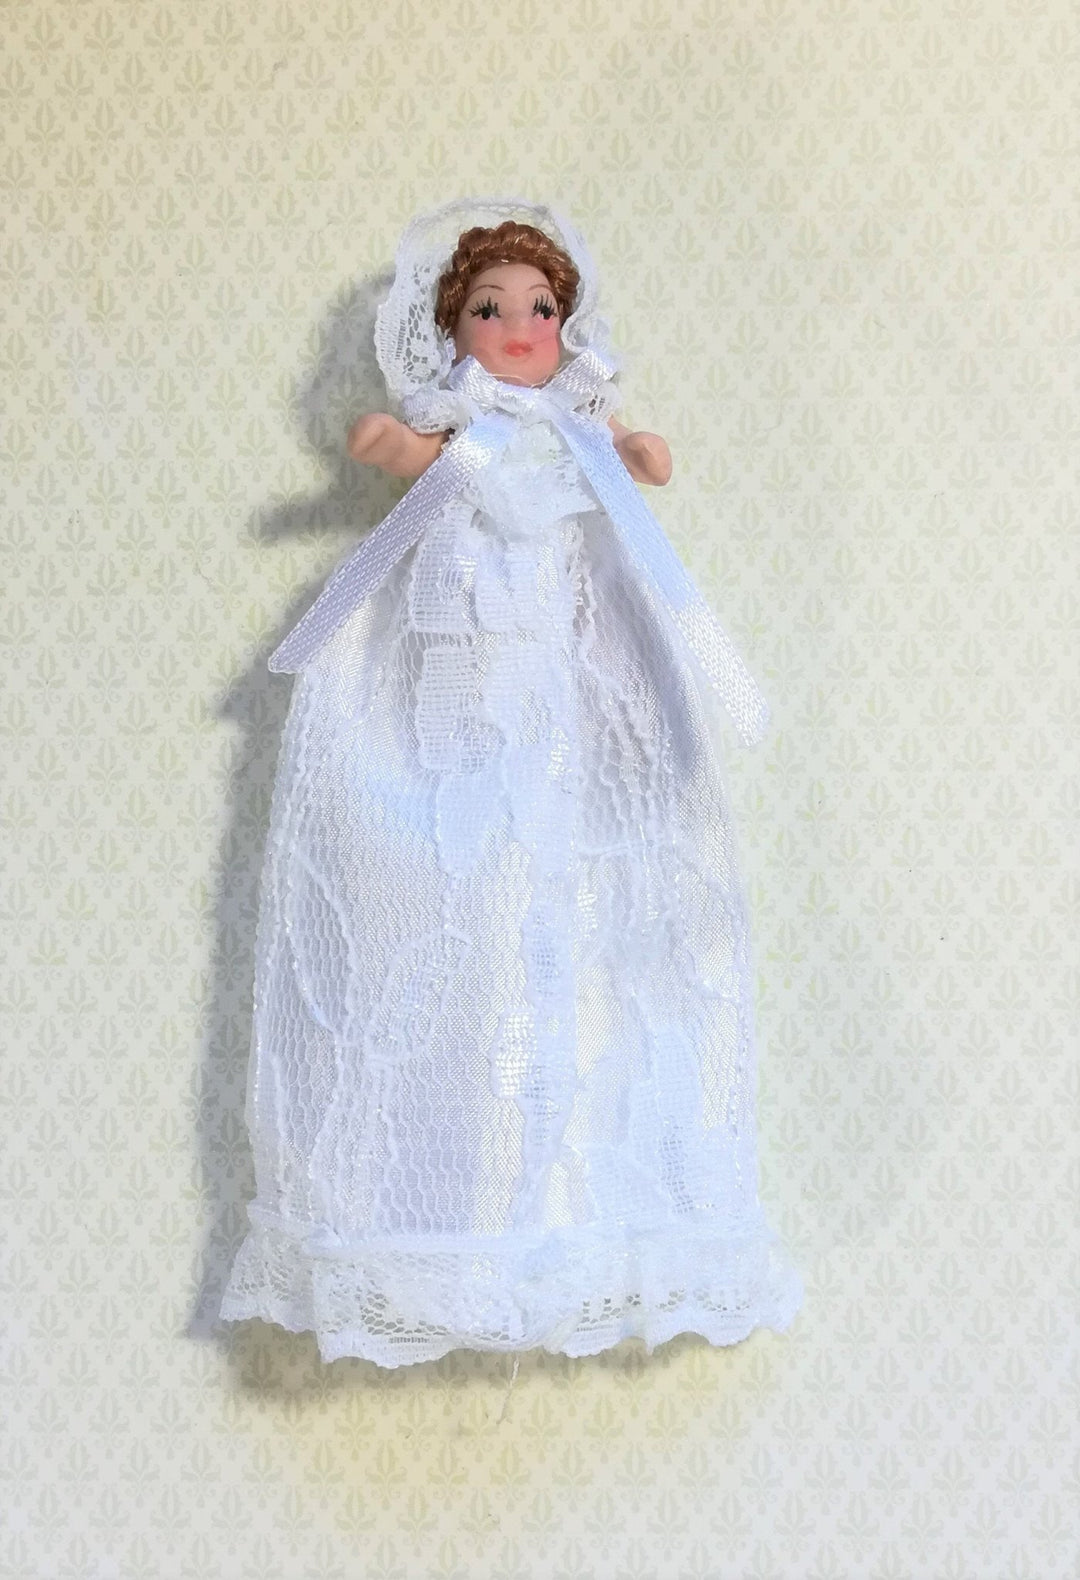 Dollhouse Miniature Baby Doll in Long White Lace Gown 1:12 Scale Brown Hair - Miniature Crush